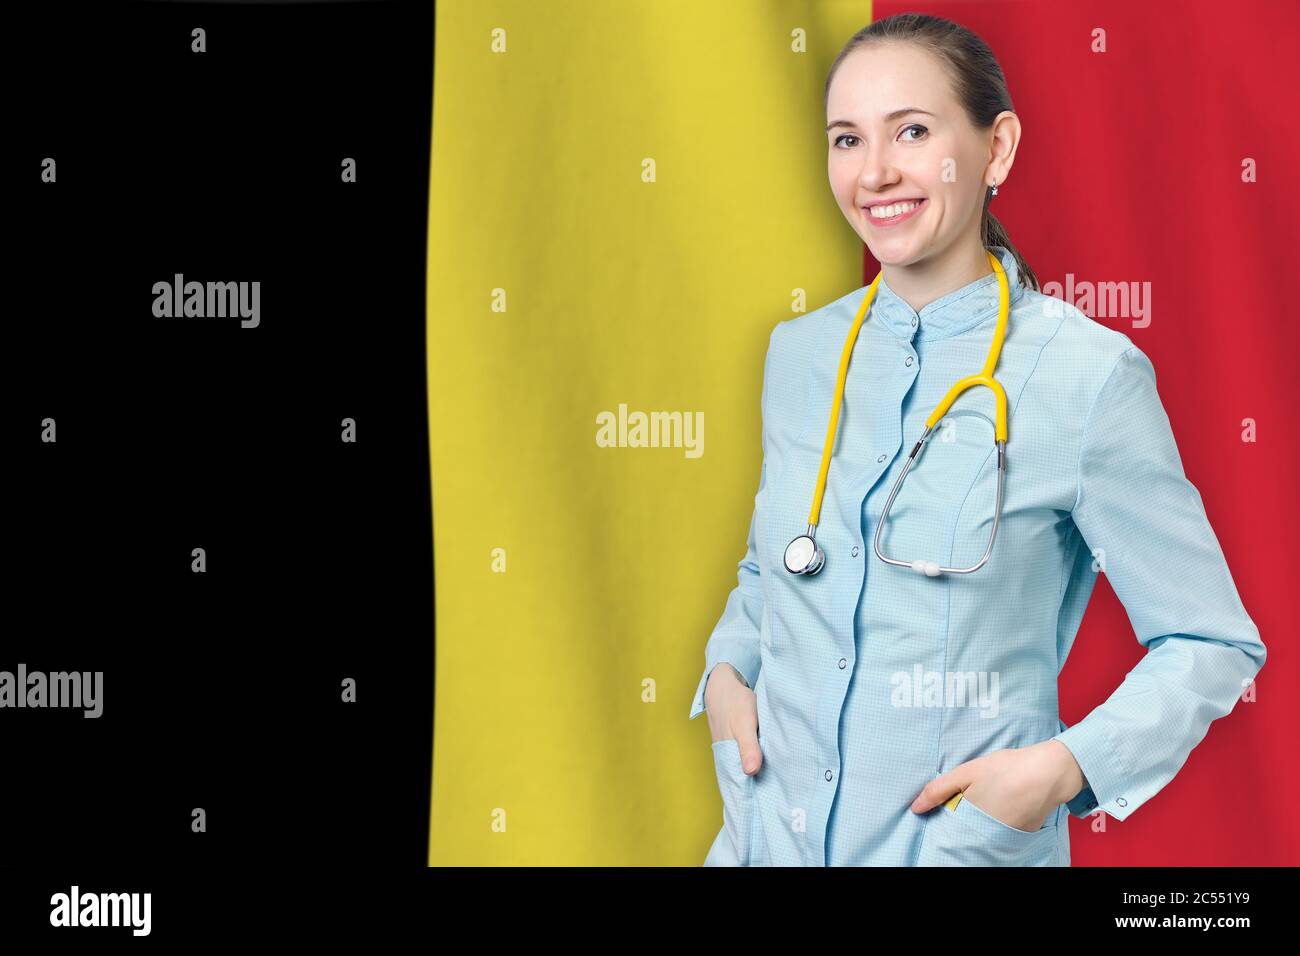 Kingdom of Belgium healthcare concept with doctor on flag background. Medical insurance, work or study in the country Stock Photo